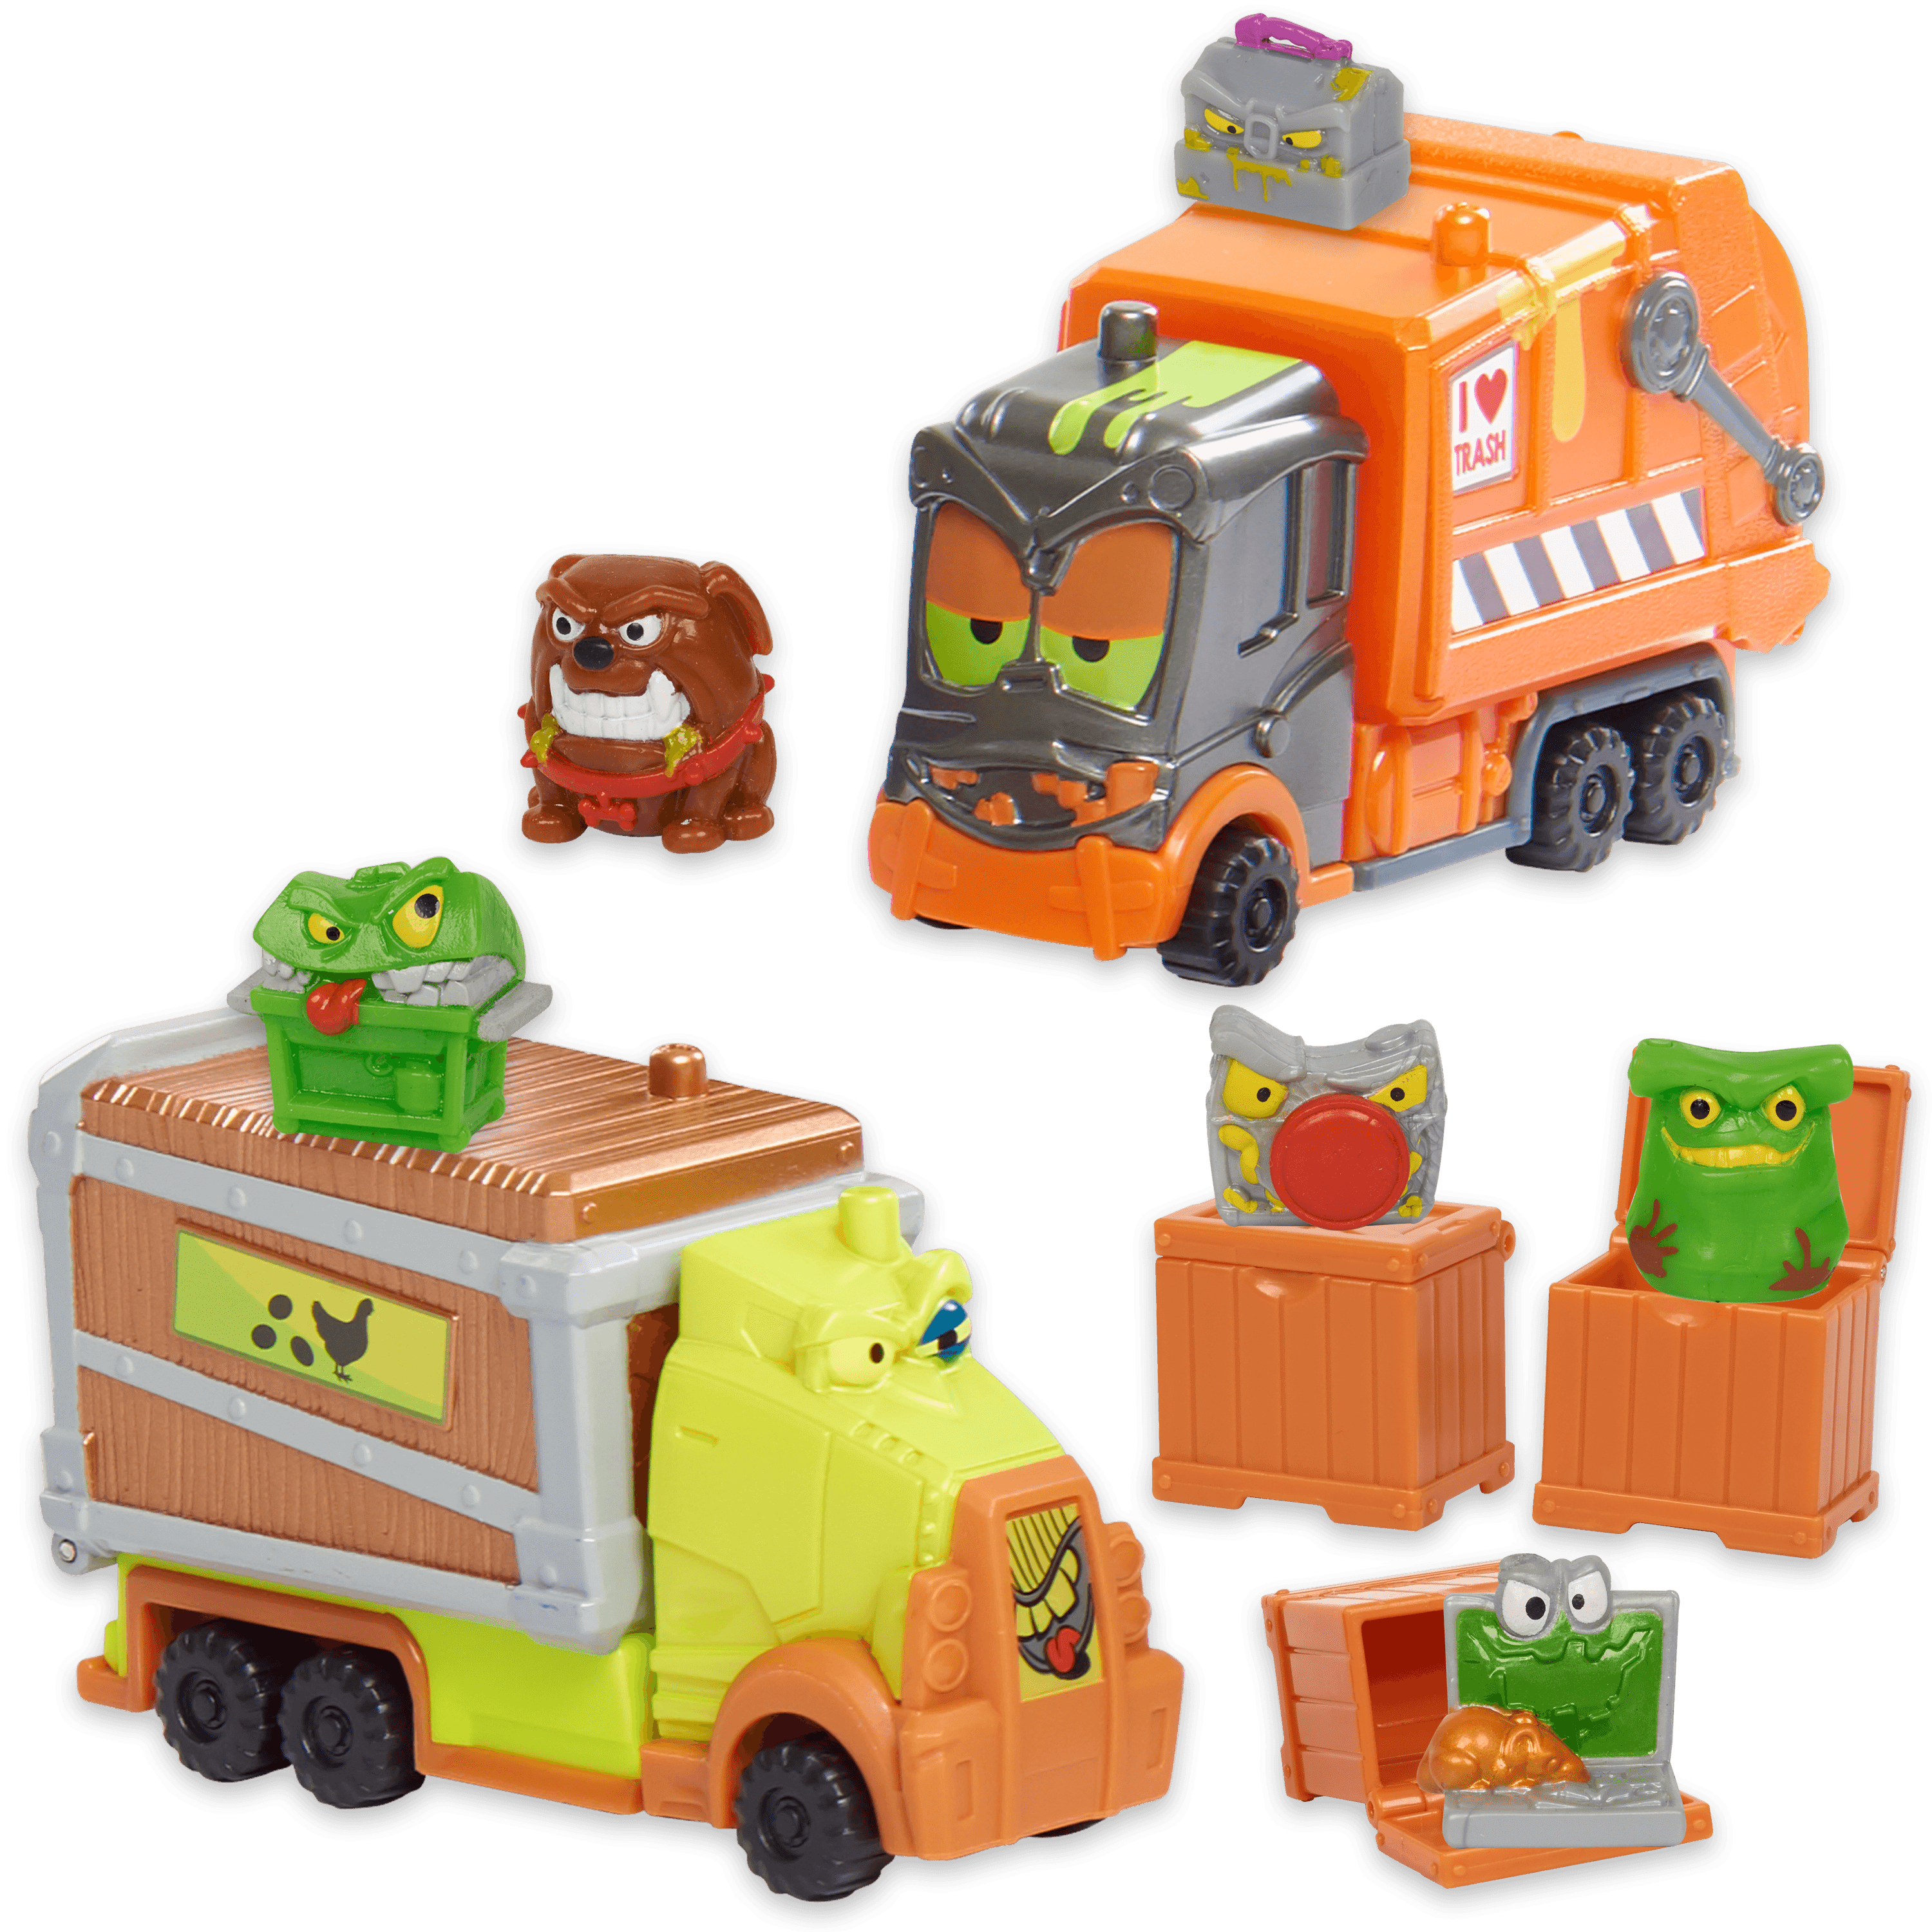 Just Play Smash Crashers Rusty Rigs Series 1 Crash The Truck Unbox The Stuff